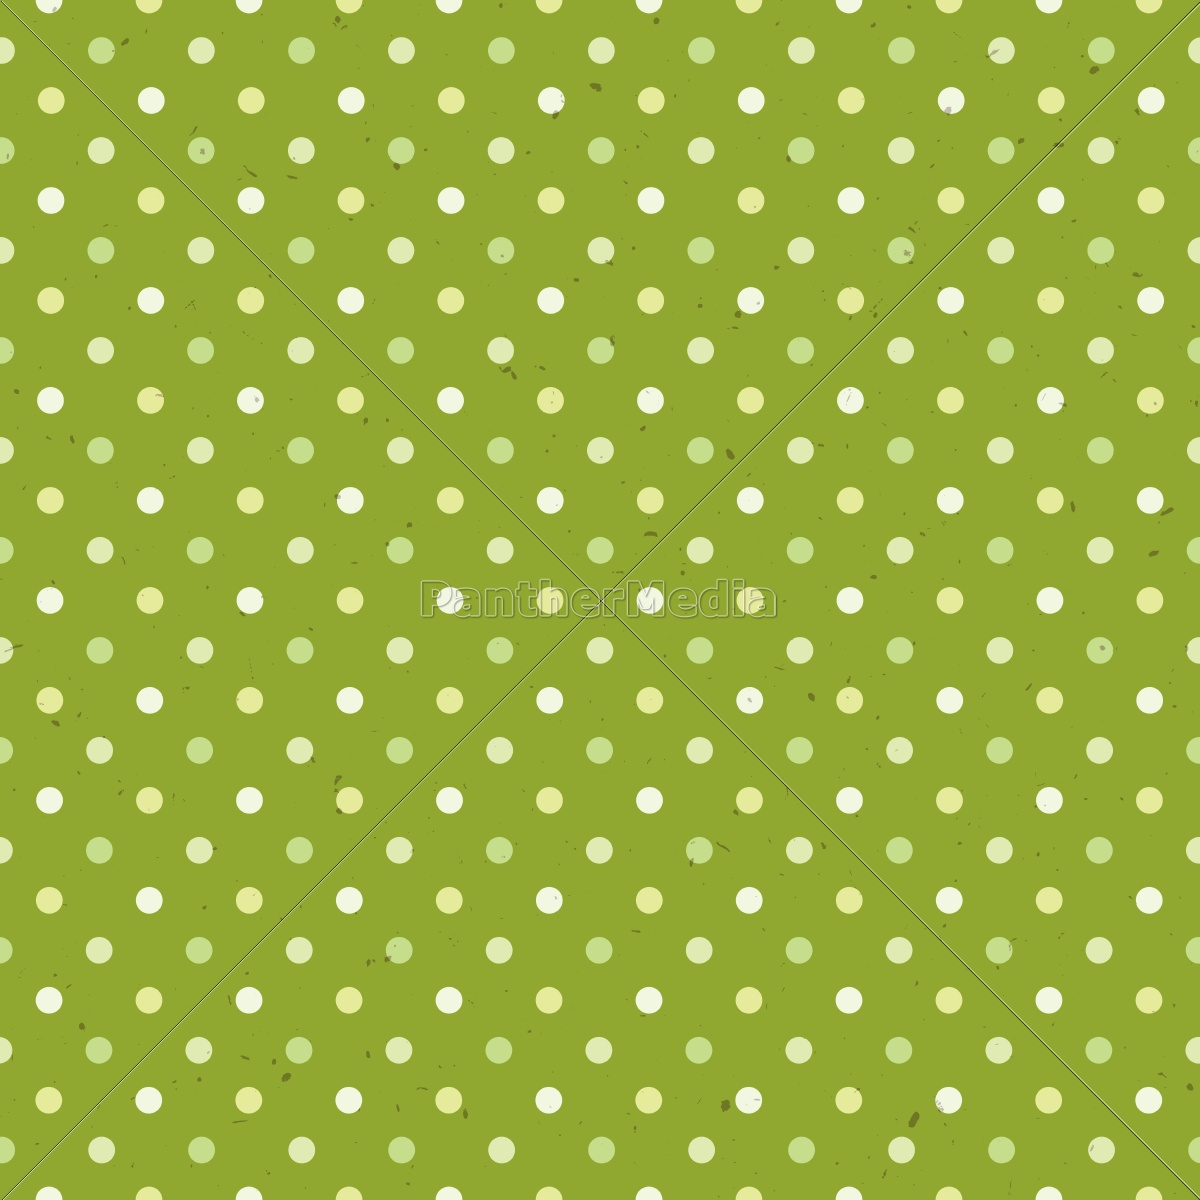 Seamless Green And White Polka Dot Background Stock Photo, Picture